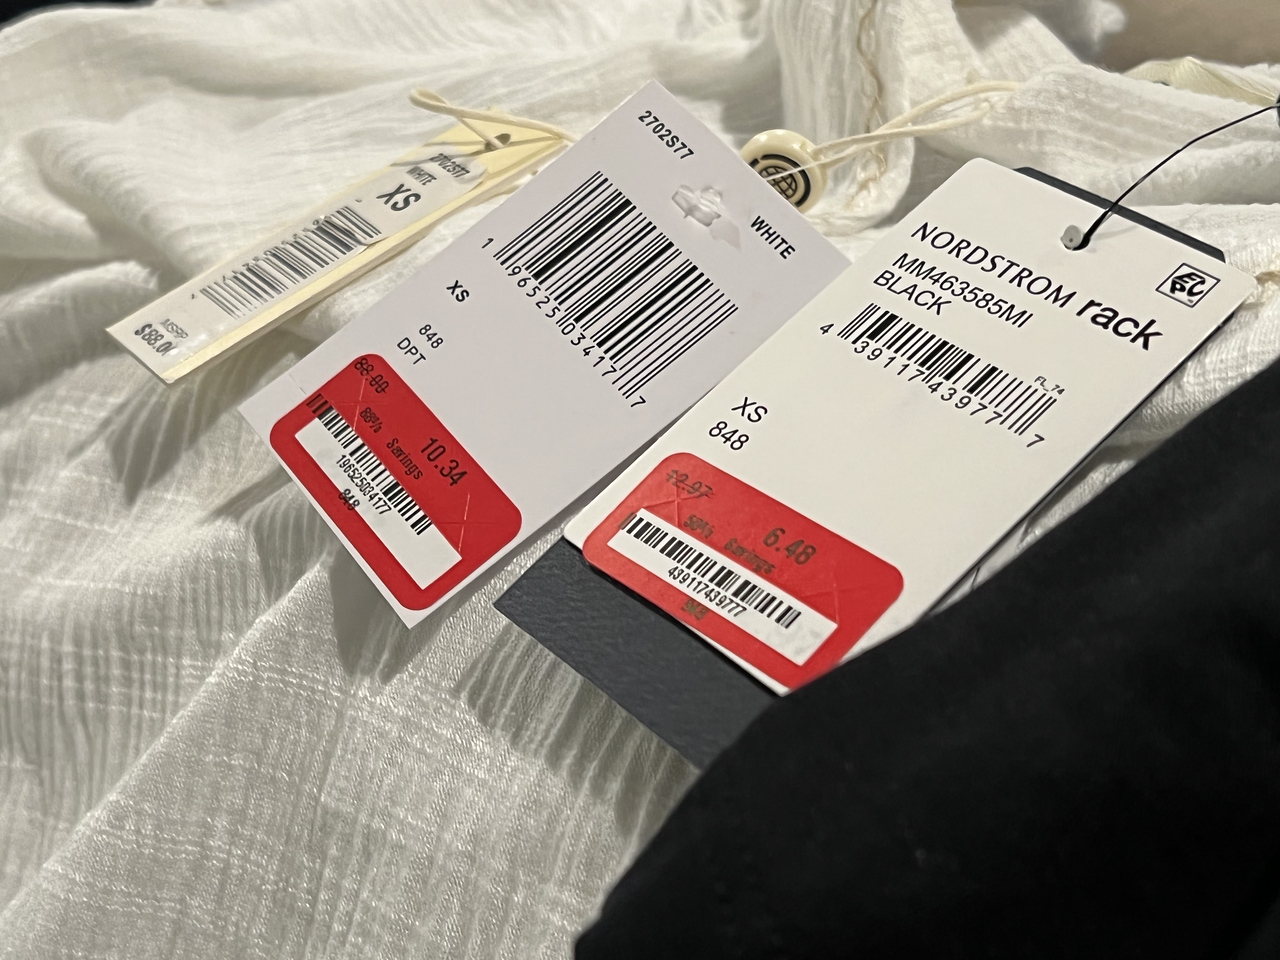 Nordstrom Rack  40% Off Clearance Apparel :: Southern Savers